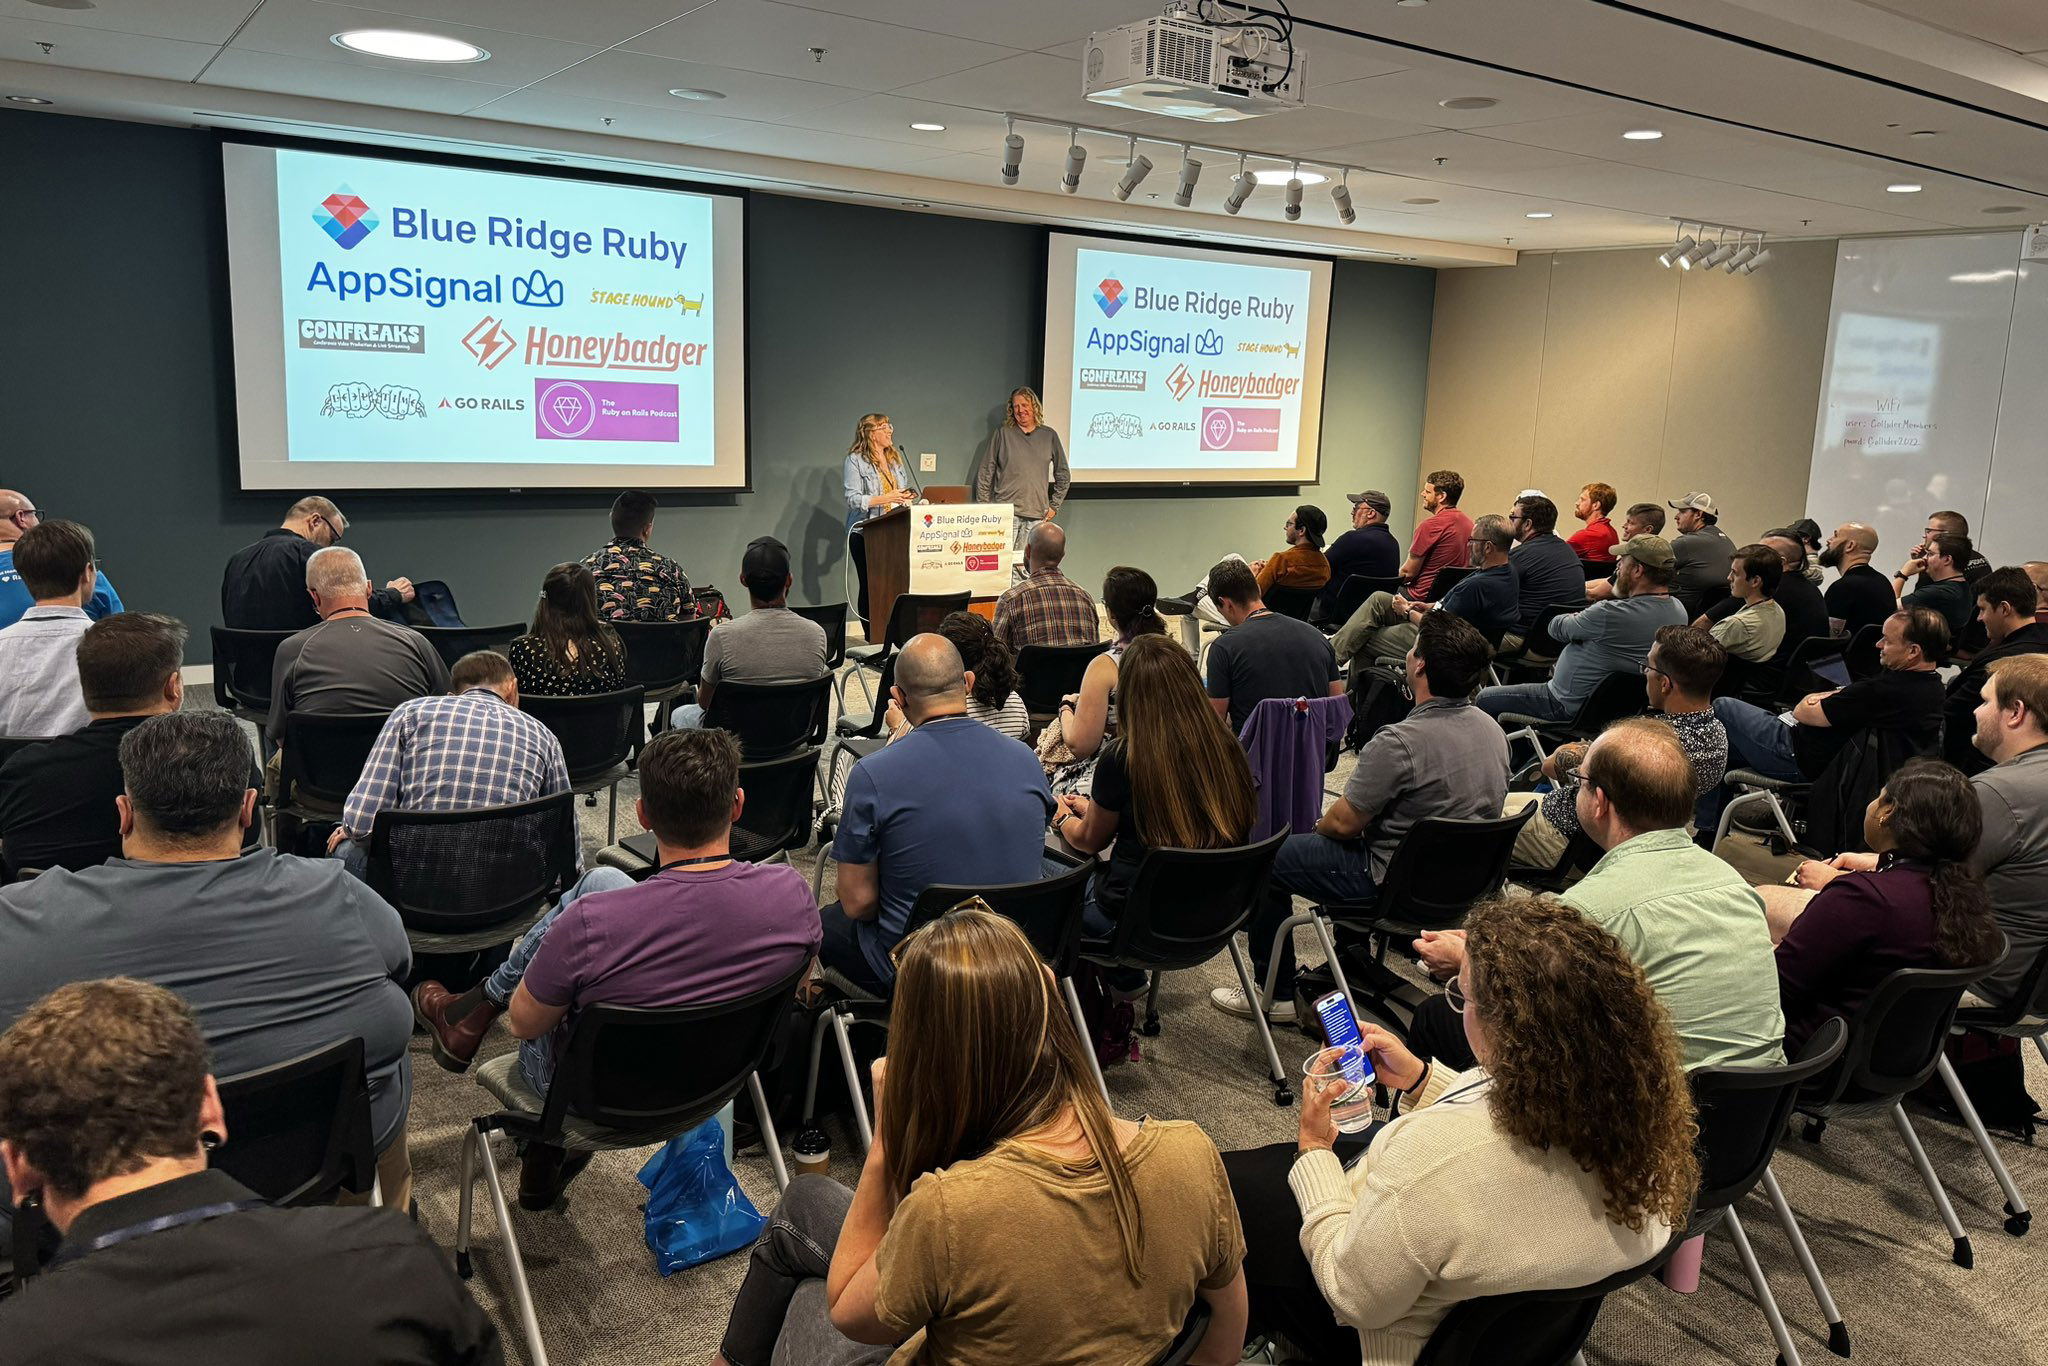 Two speakers addressing a large audience at the Blue Ridge Ruby conference, with sponsor banners including AppSignal and Honeybadger visible behind them, in a room filled with seated attendees listening attentively.